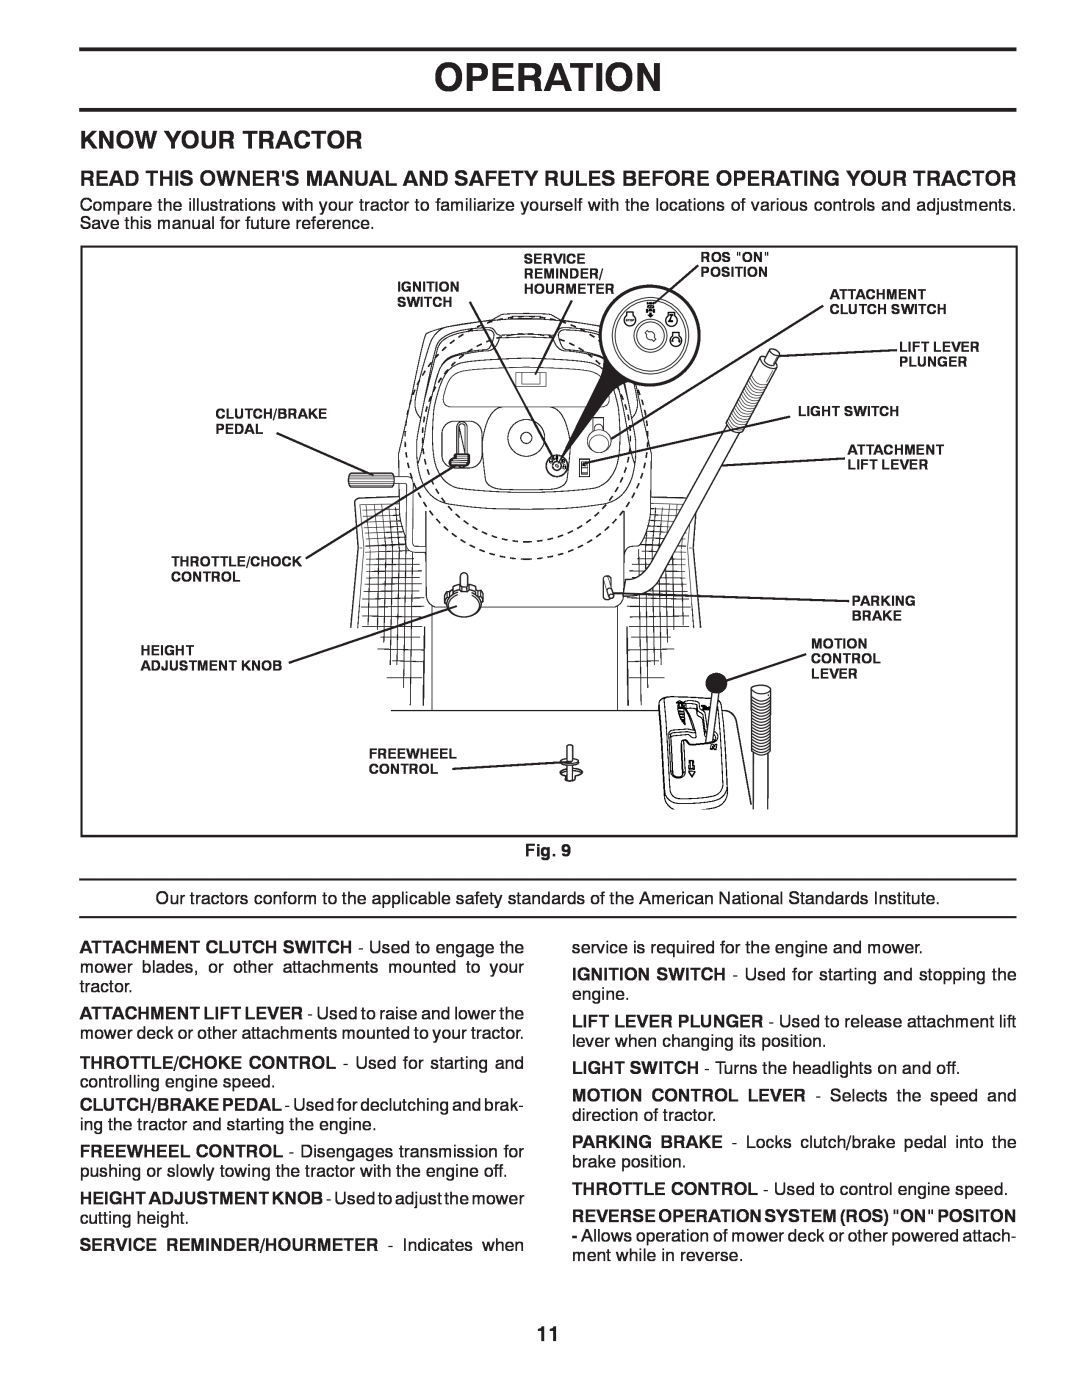 Jonsered LT2220 CMA2 manual Know Your Tractor, Operation, HEIGHT ADJUSTMENT KNOB - Used to adjust the mower cutting height 